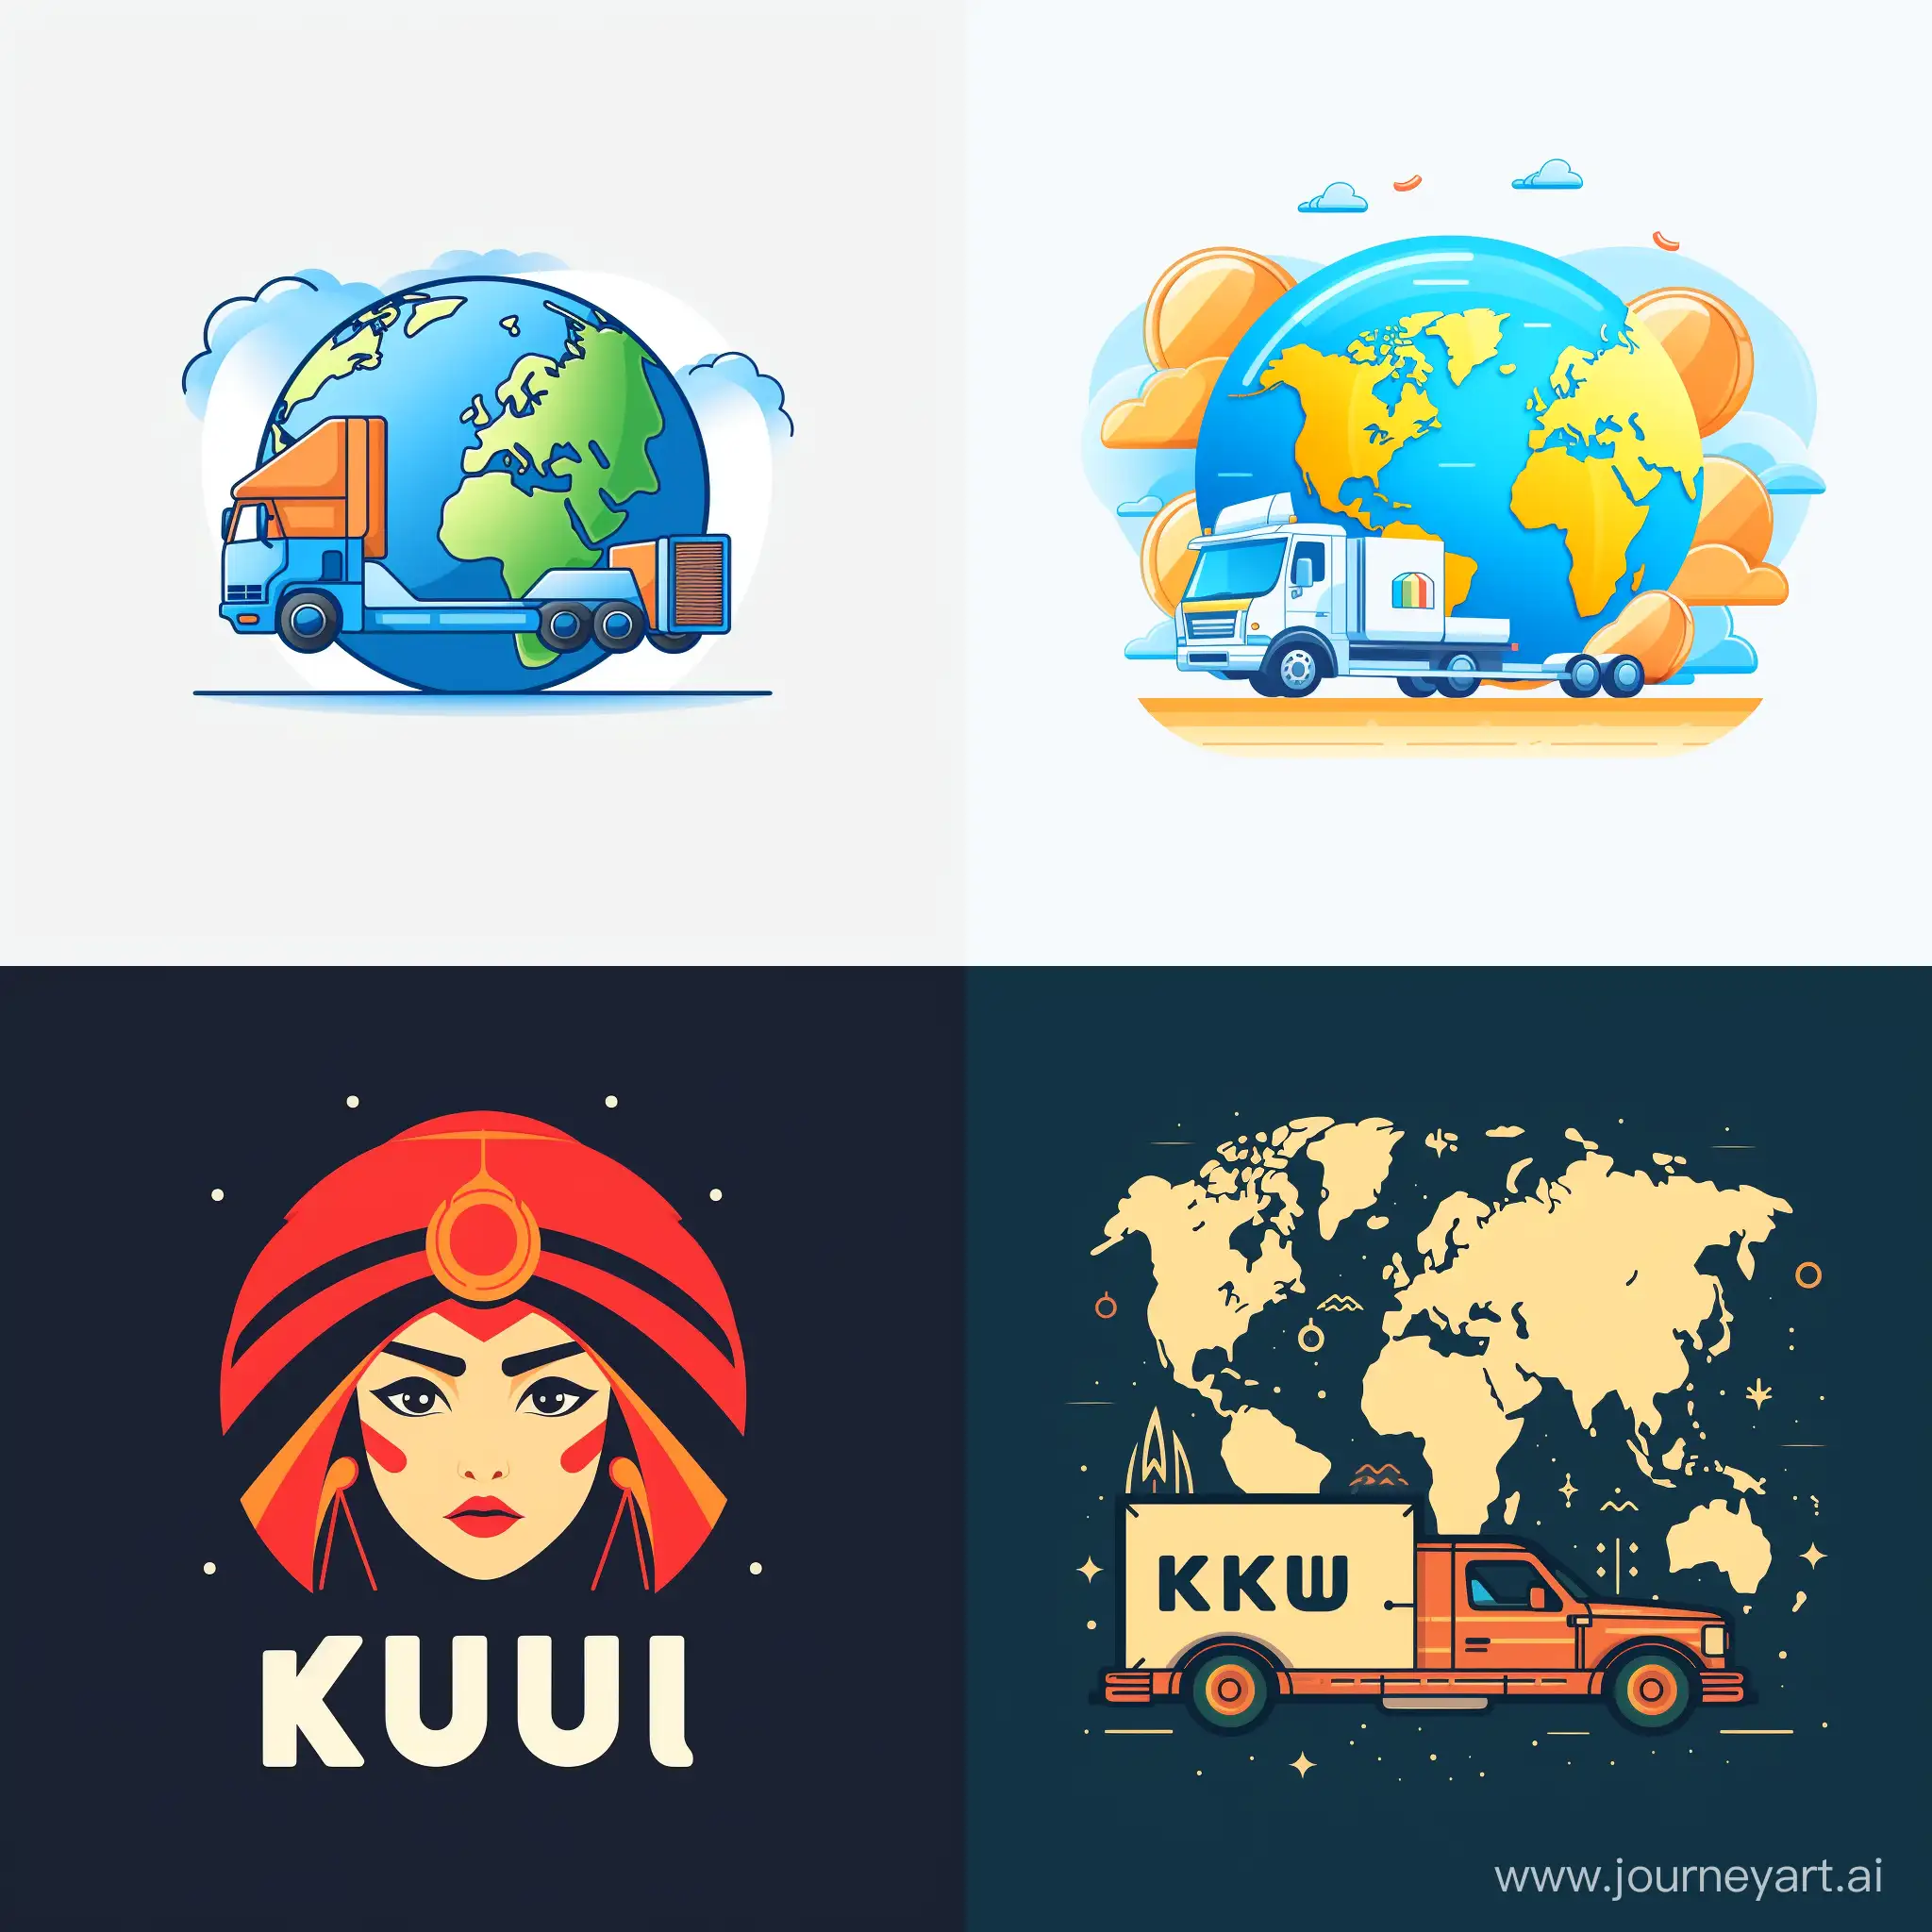 Global-Goods-Delivery-by-KUKU-App-Travelers